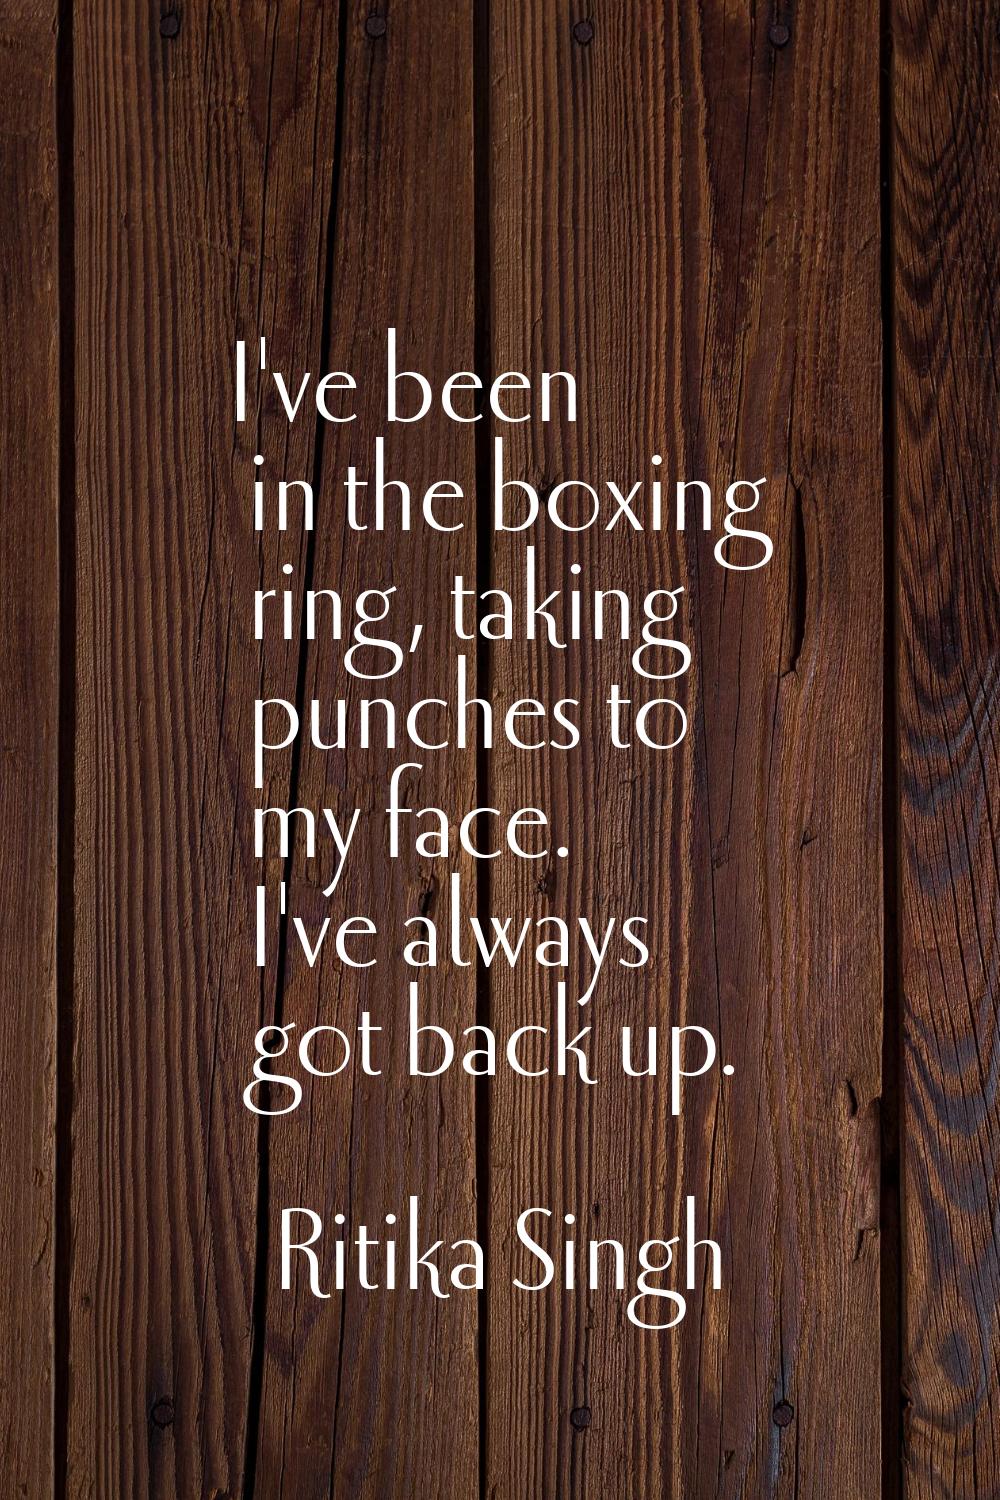 I've been in the boxing ring, taking punches to my face. I've always got back up.